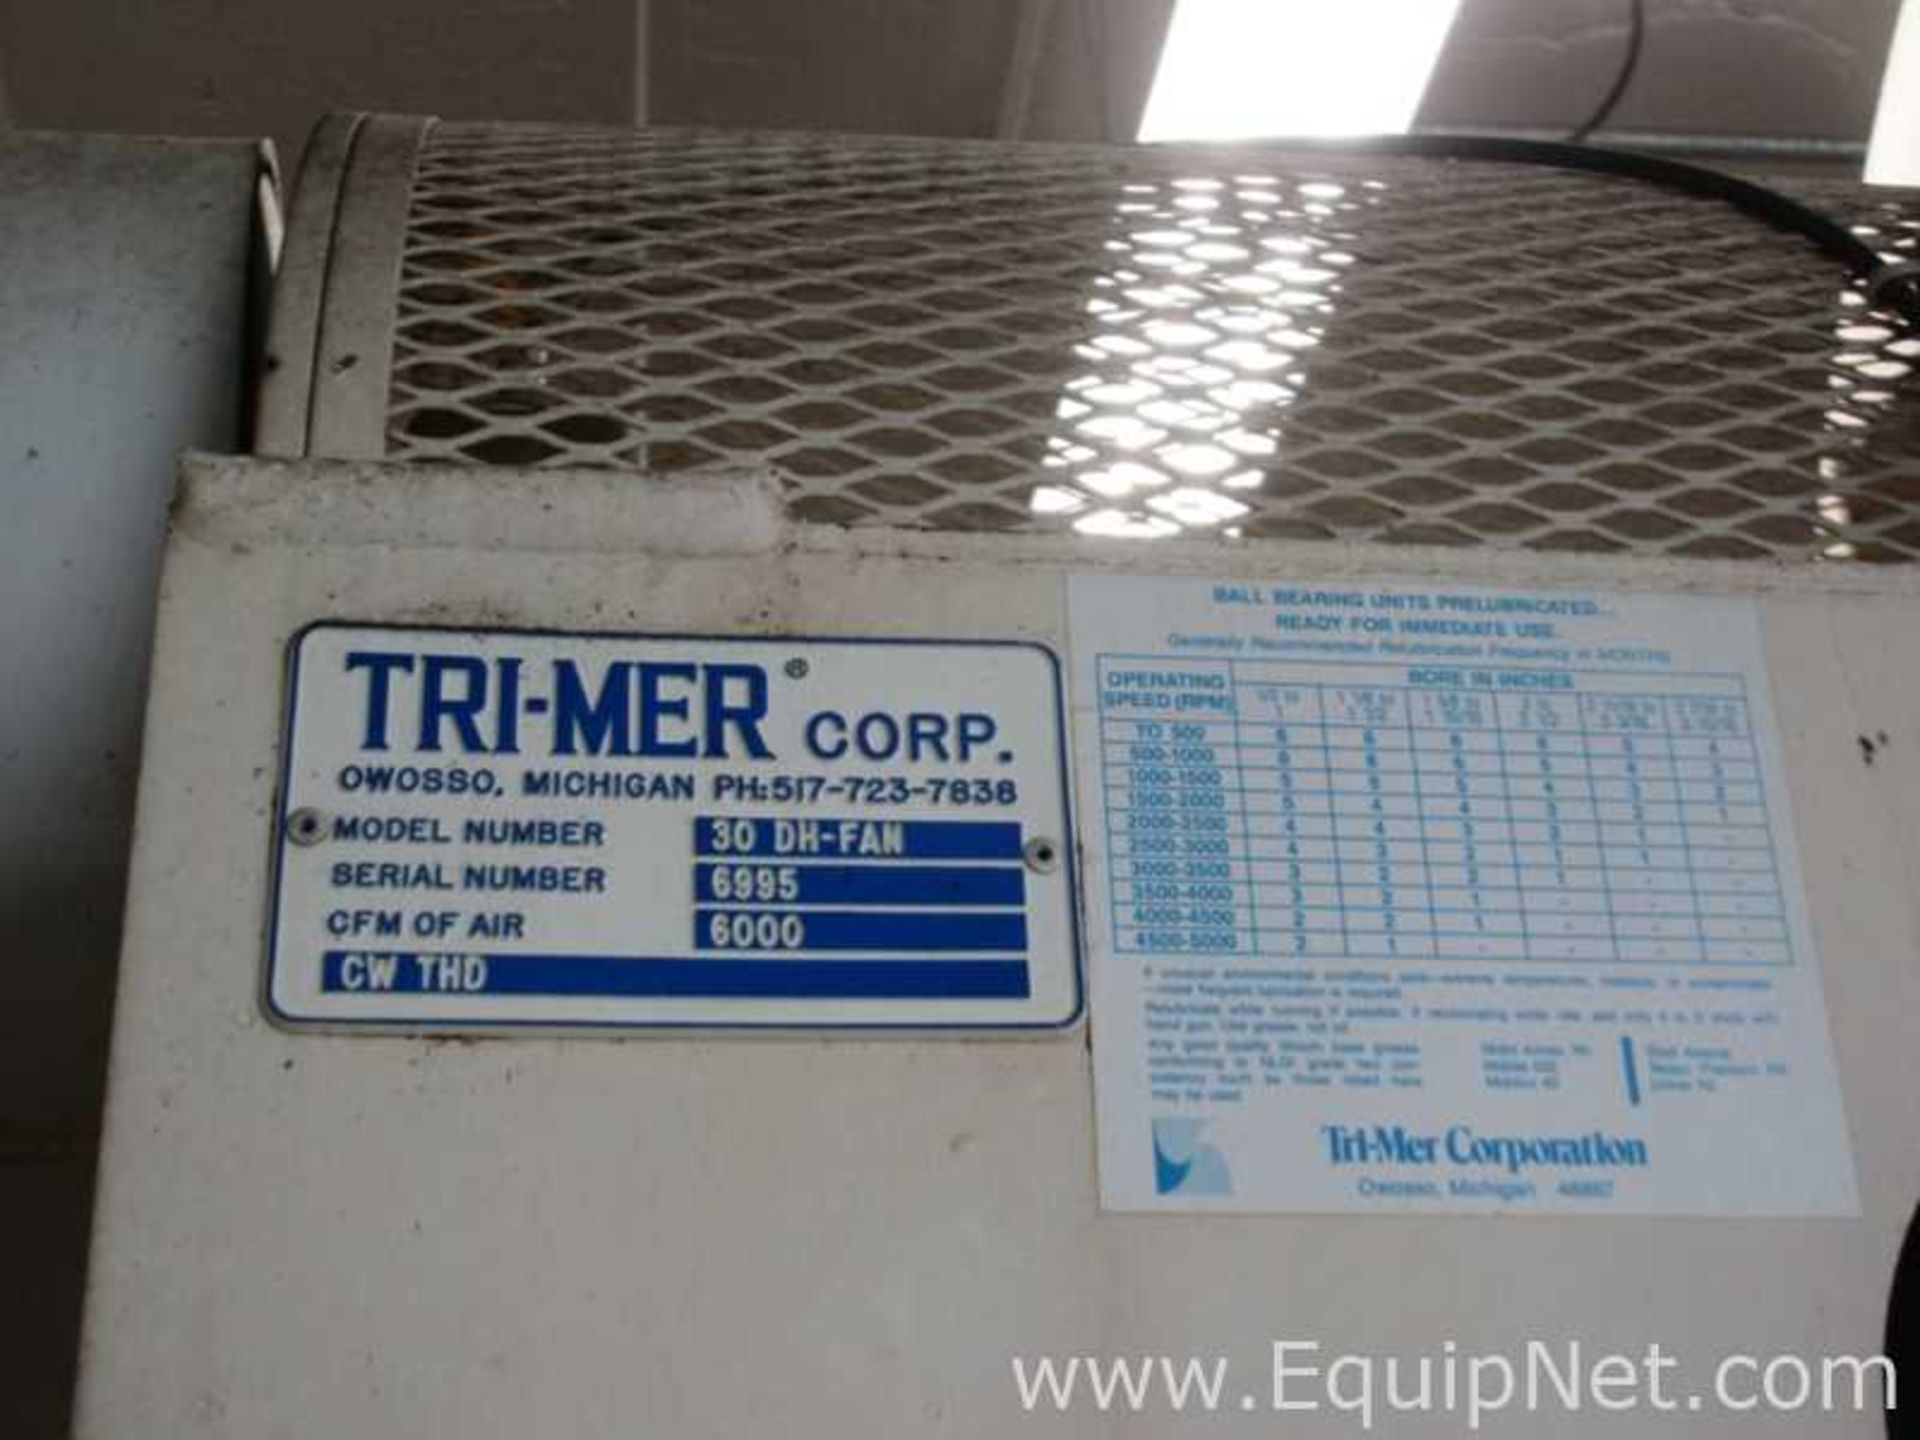 EQUIPNET LISTING #597069; REMOVAL COST: $0; MODEL: 60 H WHIRL-WET; DESCRIPTION: Tri-Mer Corp. 60 H - Image 11 of 14